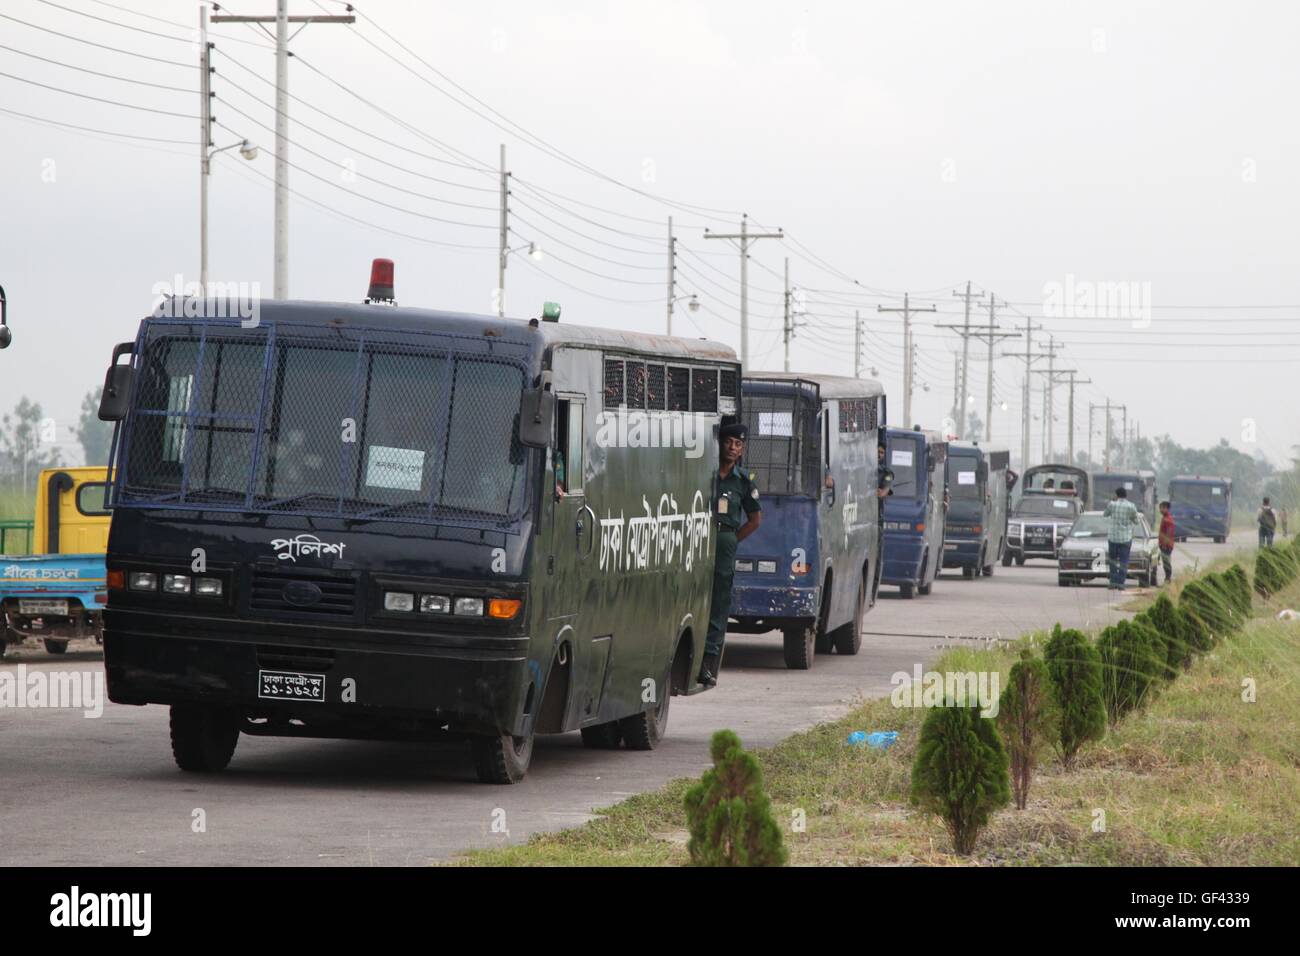 Dhaka, Keranigonj, California, Bangladesh. 29th July, 2016. A police escort the prisons van during the shifting of prisoners as the shifting of prisoners from the 200-year-old Dhaka Central Jail to the newly built prison at Rajendrapur, in Keraniganj, has started on 29 July, 2016, Dhaka, Bangladesh. The new prison at Rajendrapur is located 12 kilometres away from the old one built in 1788 on Nazim Uddin Road. According to the local media report Prison authorities say the Dhaka Central Jail housed nearly 8,000 prisoners, 6,300 of them male, and the rest female inmates. The women prisoners w Stock Photo